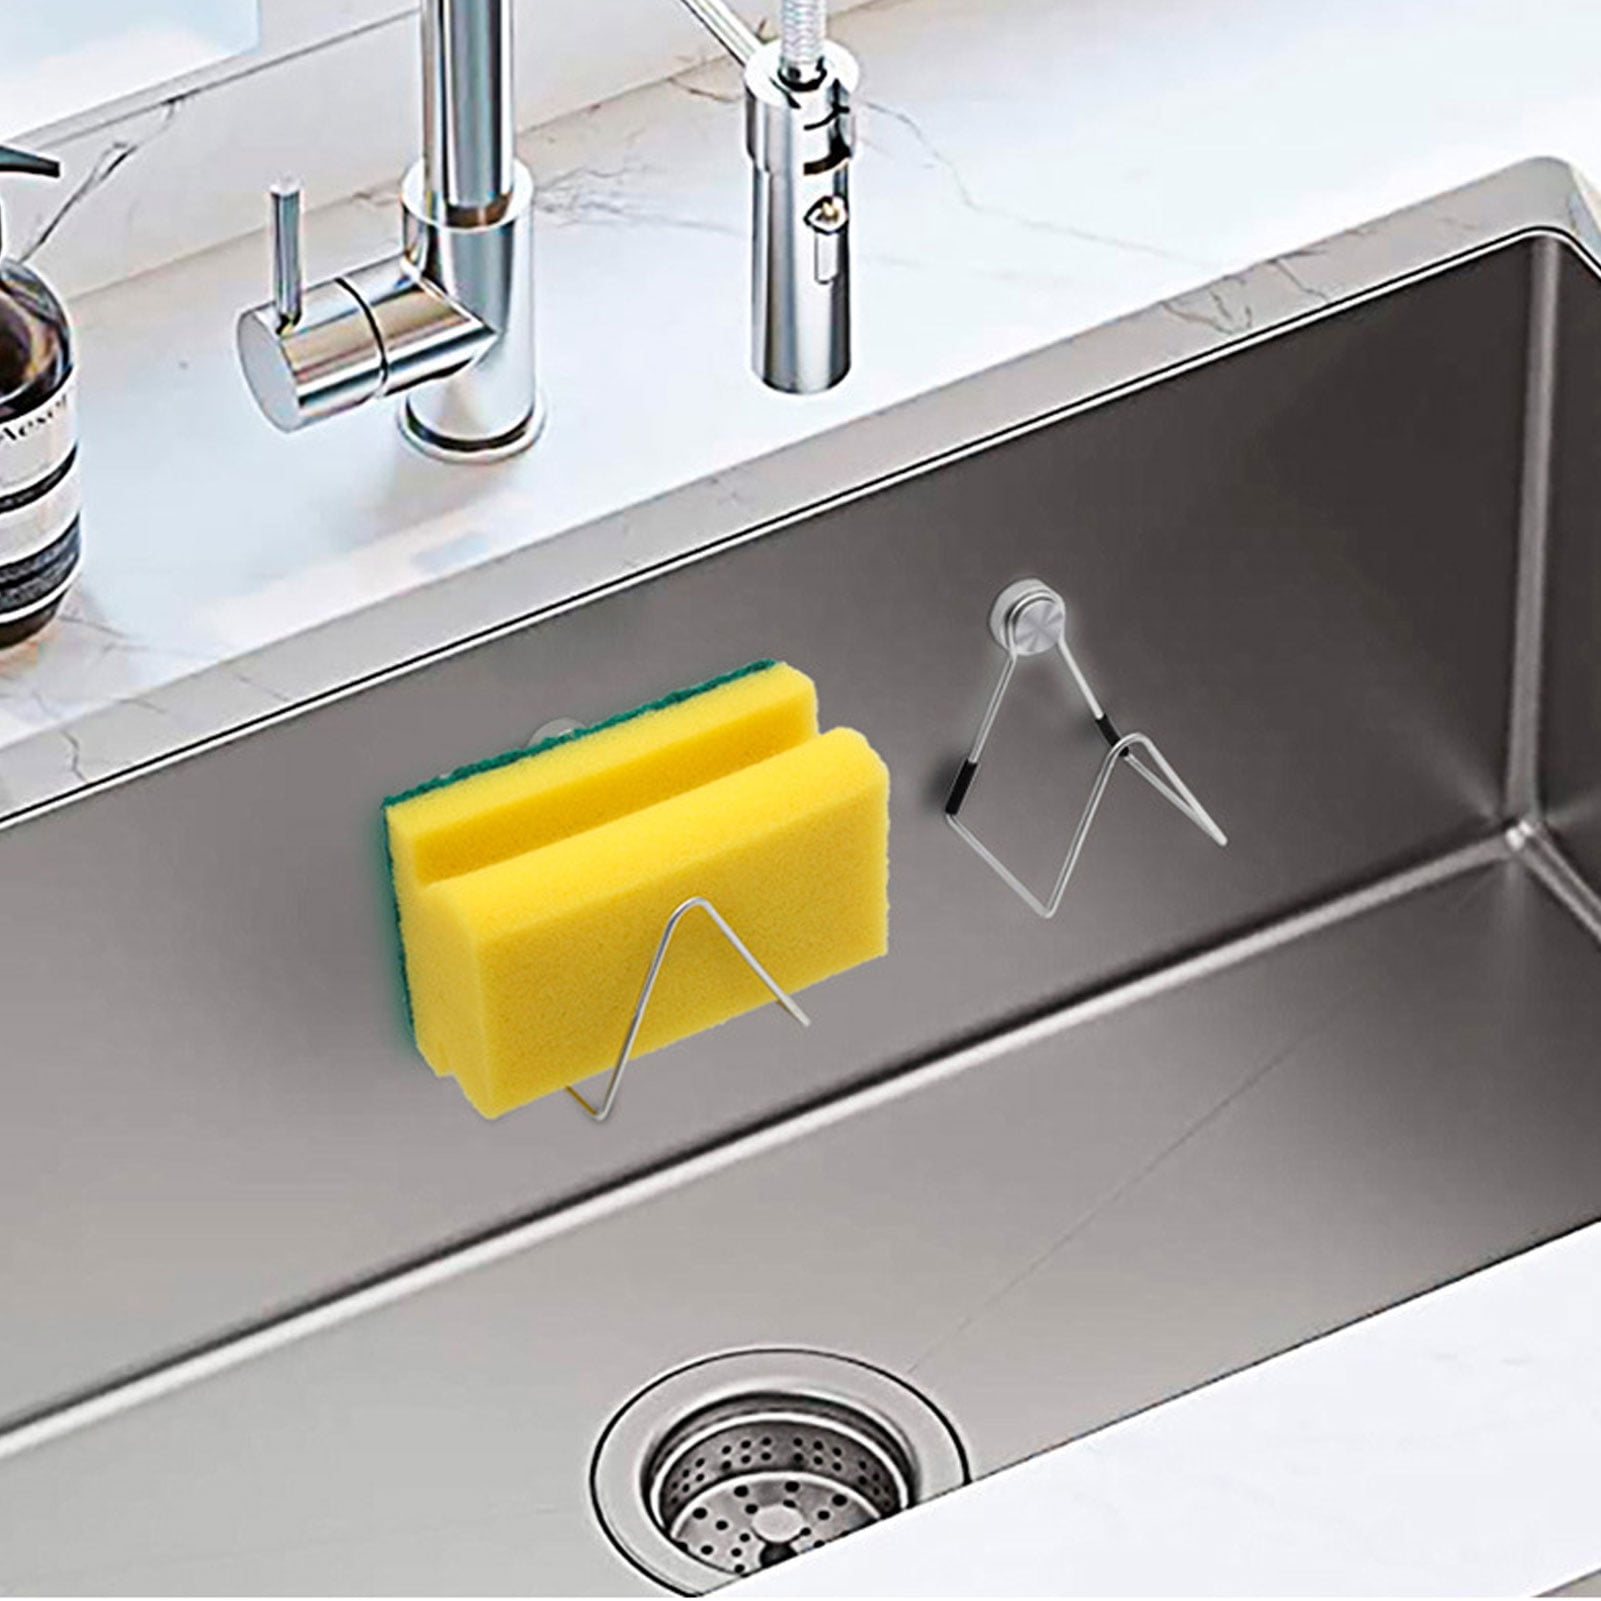 Kitchen Details Metal Sink Caddy with Suction Attachment - Kitchen Details  Sponge Holder in Black - 5.5X2.6X2.4 inches - Perfect for Sponges 